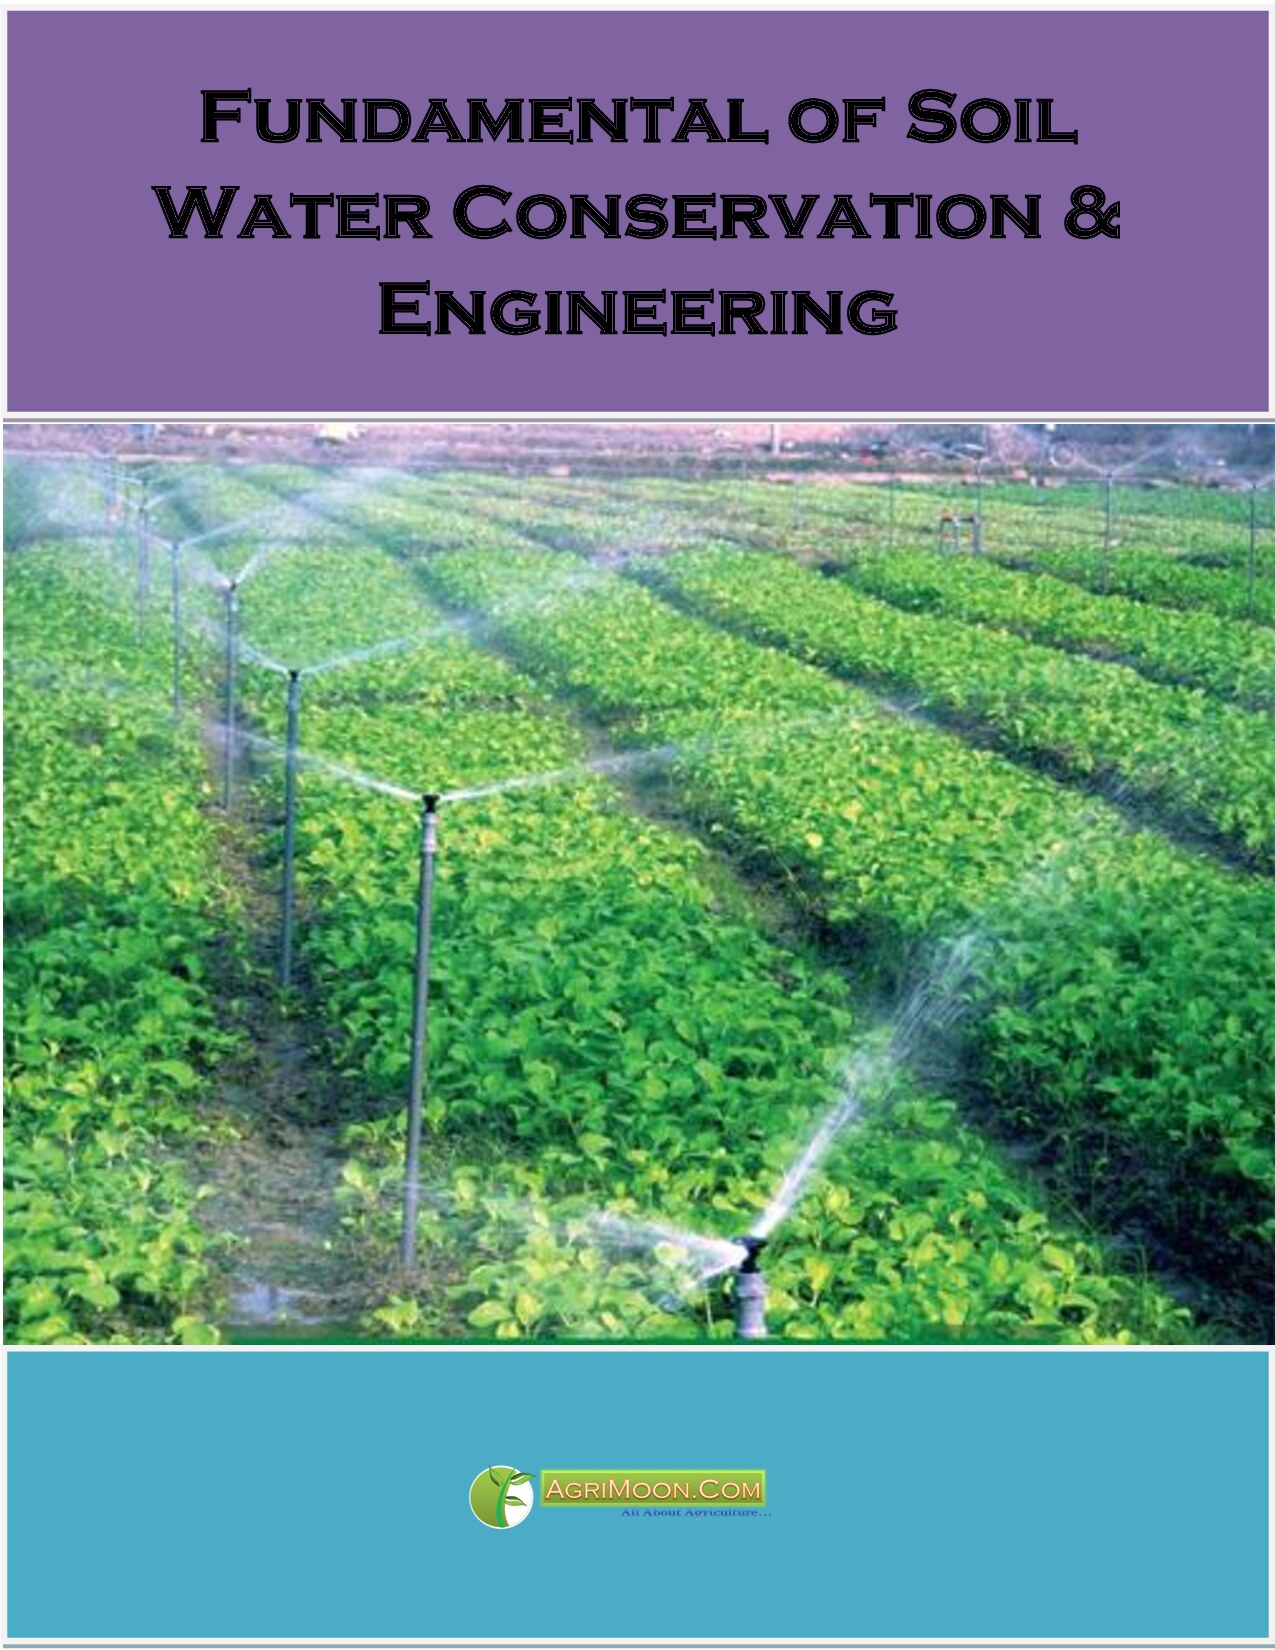 Fundamental of Soil Water Conservation & Engineering ( PDFDrive.com )